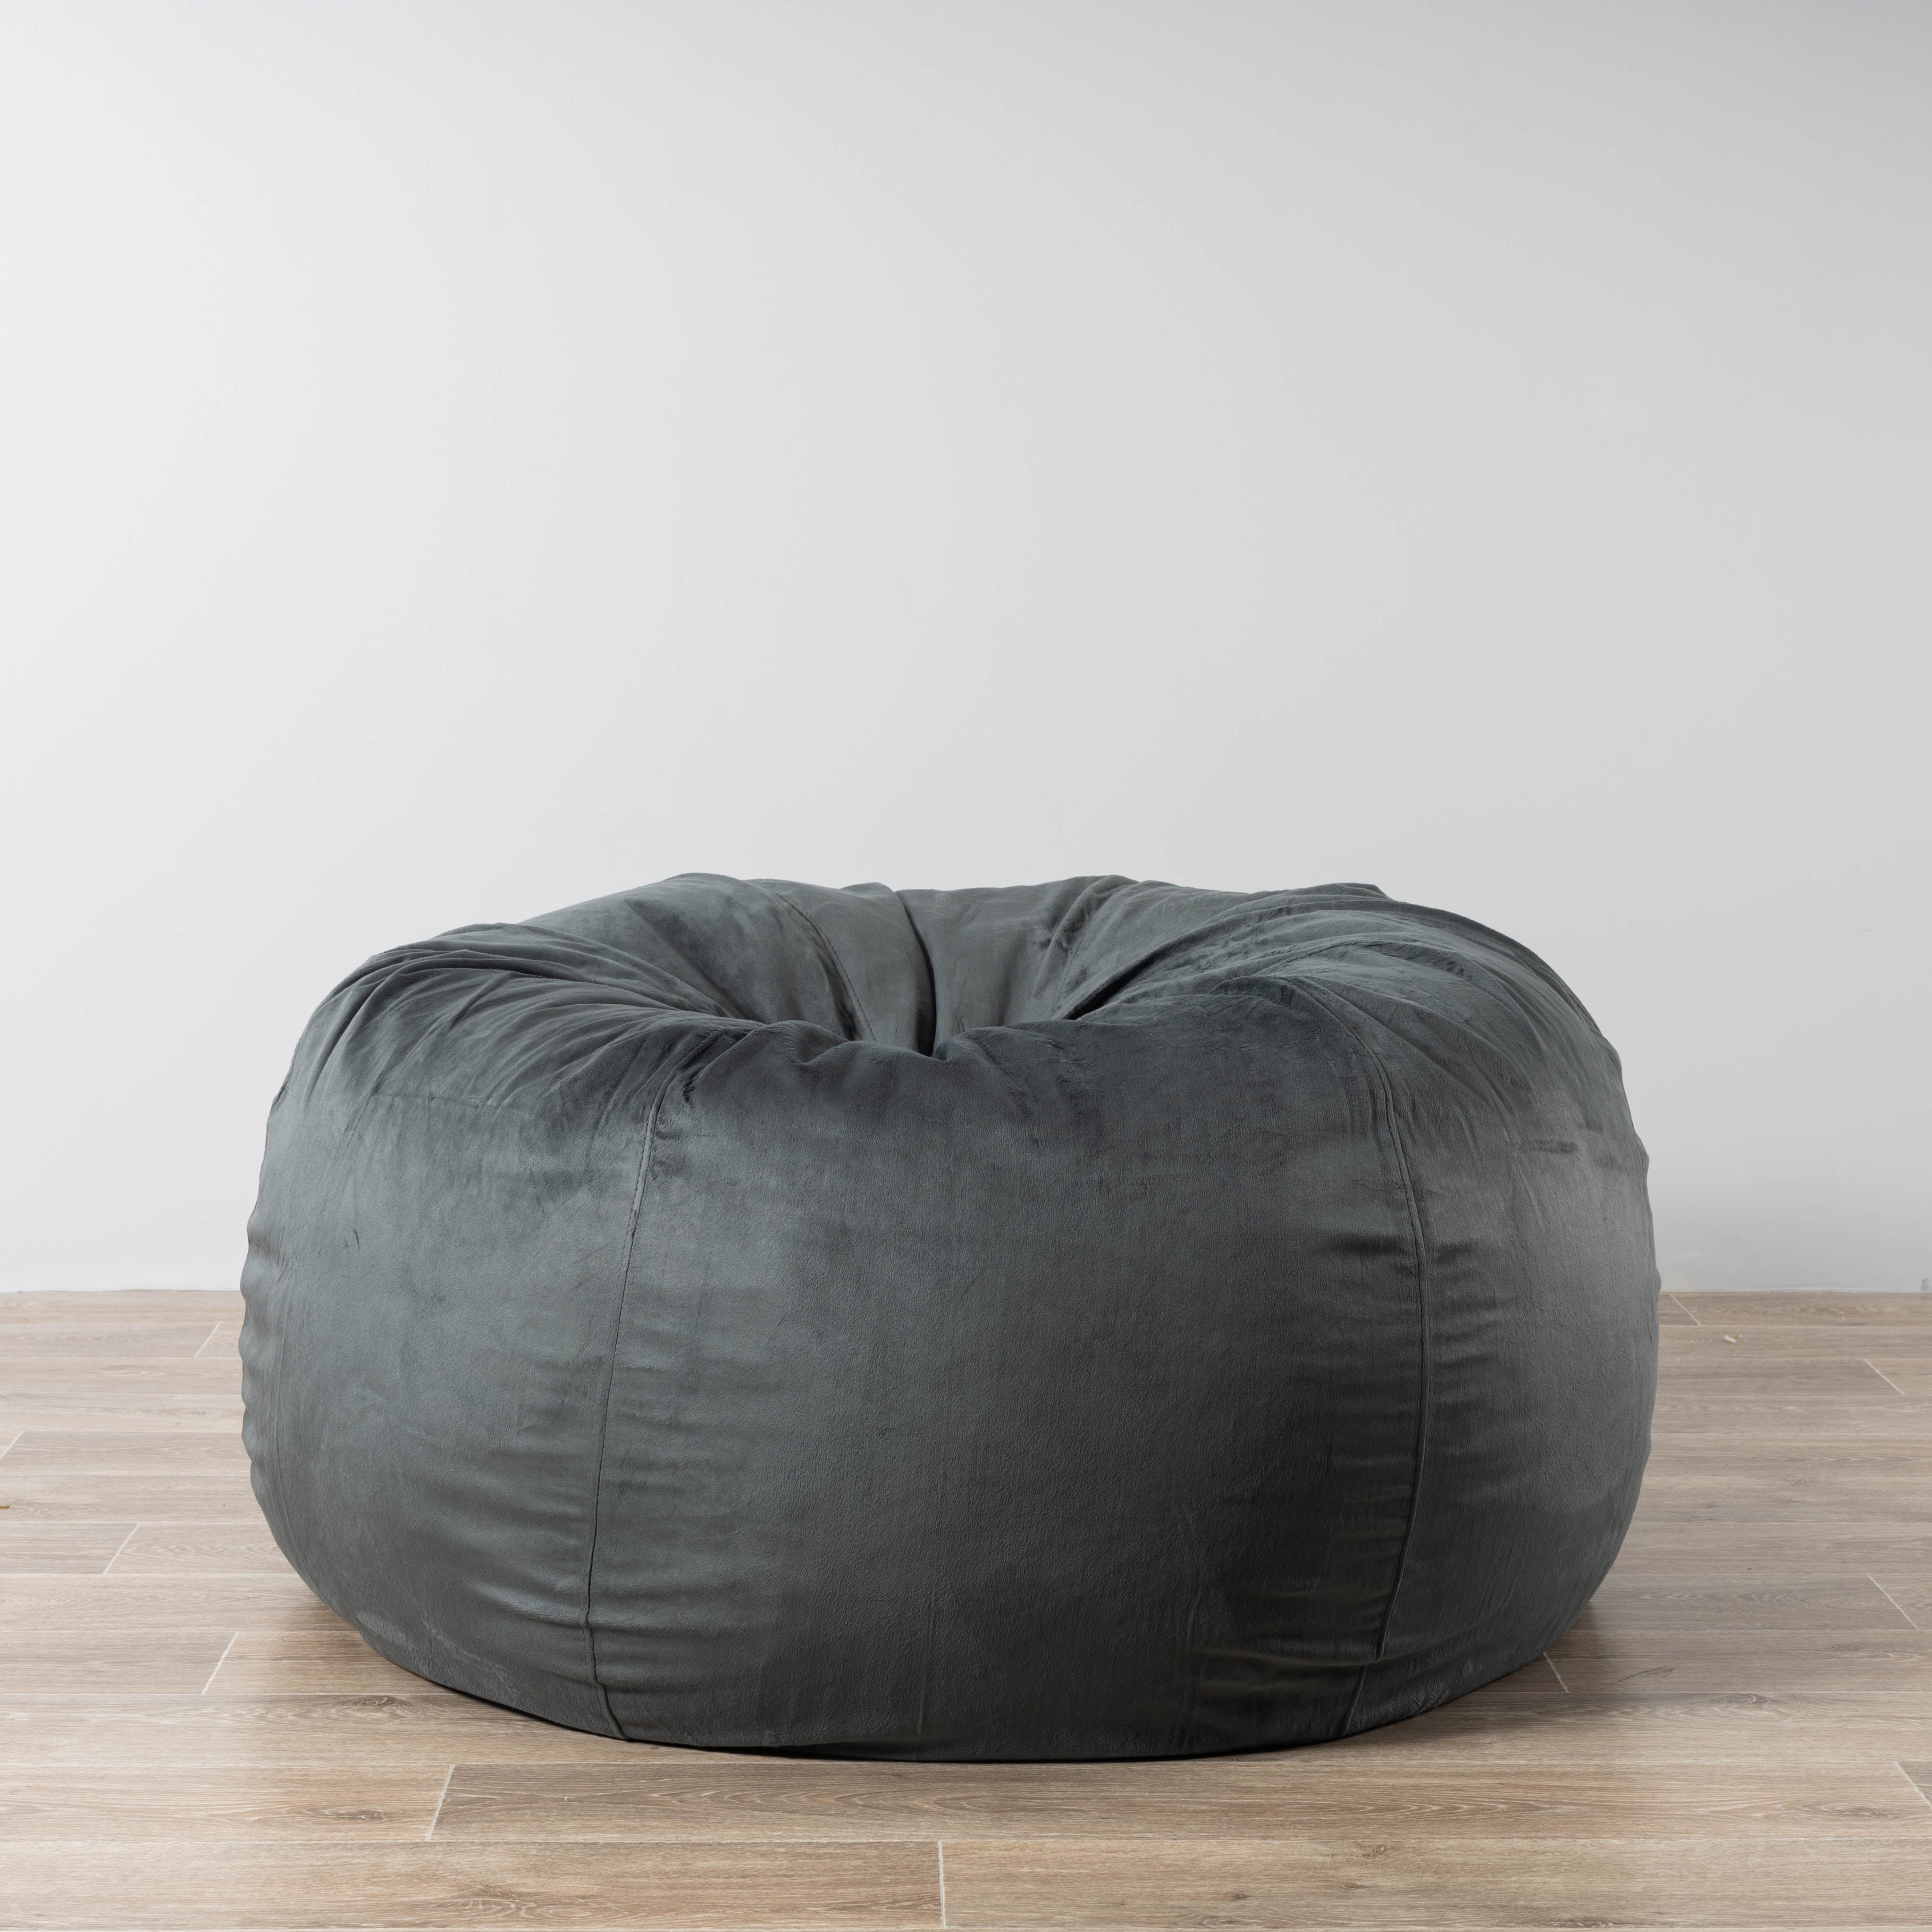 Bean Bag Chair Cover without Filling Mustard Sandwich & Charcoal 